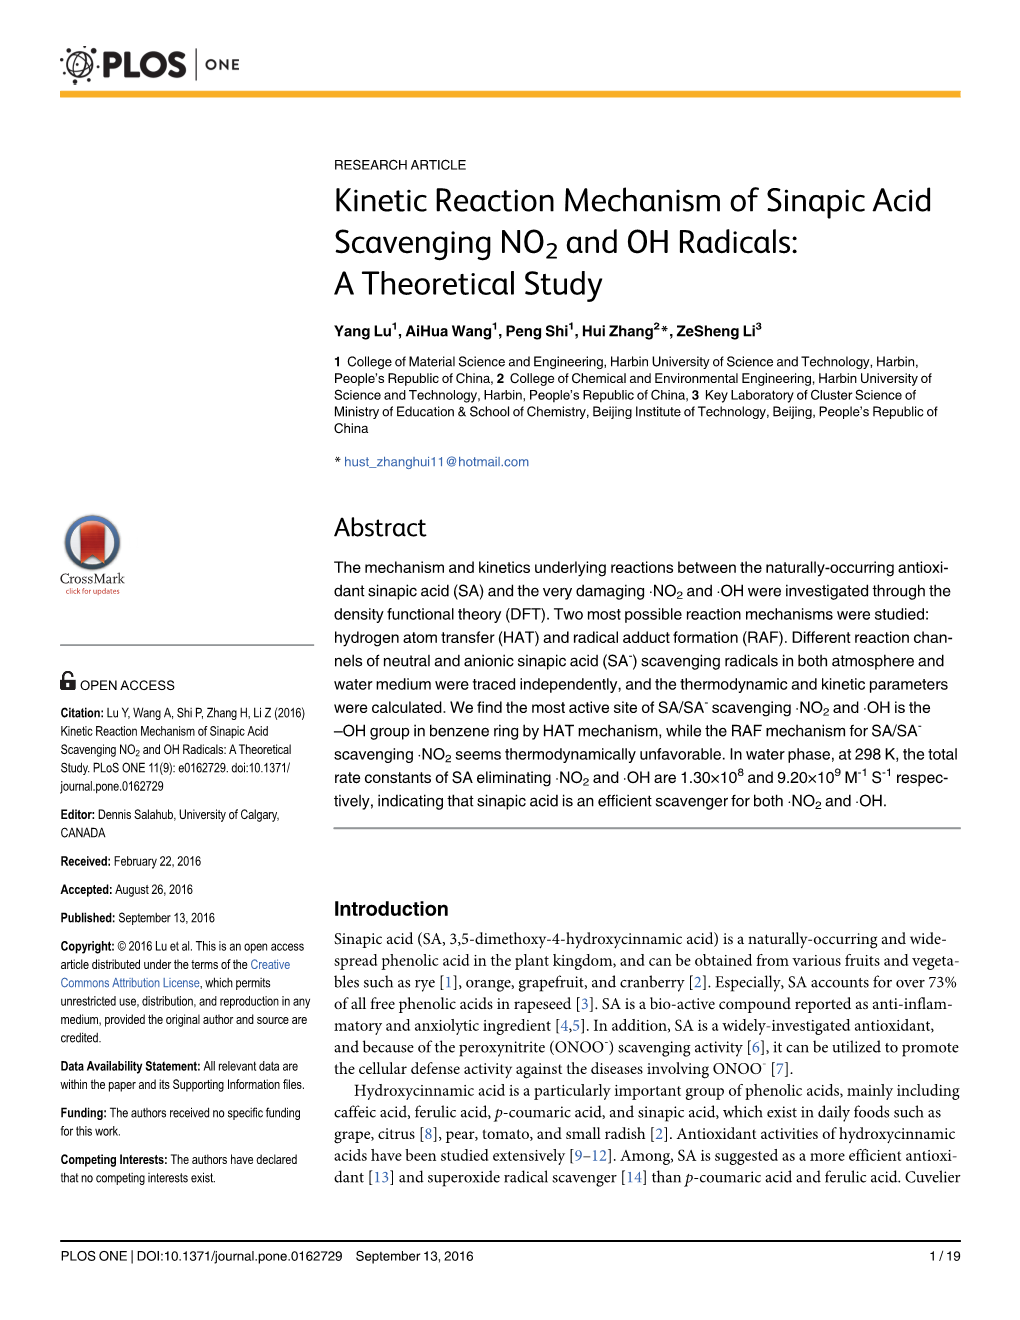 Kinetic Reaction Mechanism of Sinapic Acid Scavenging NO2 And